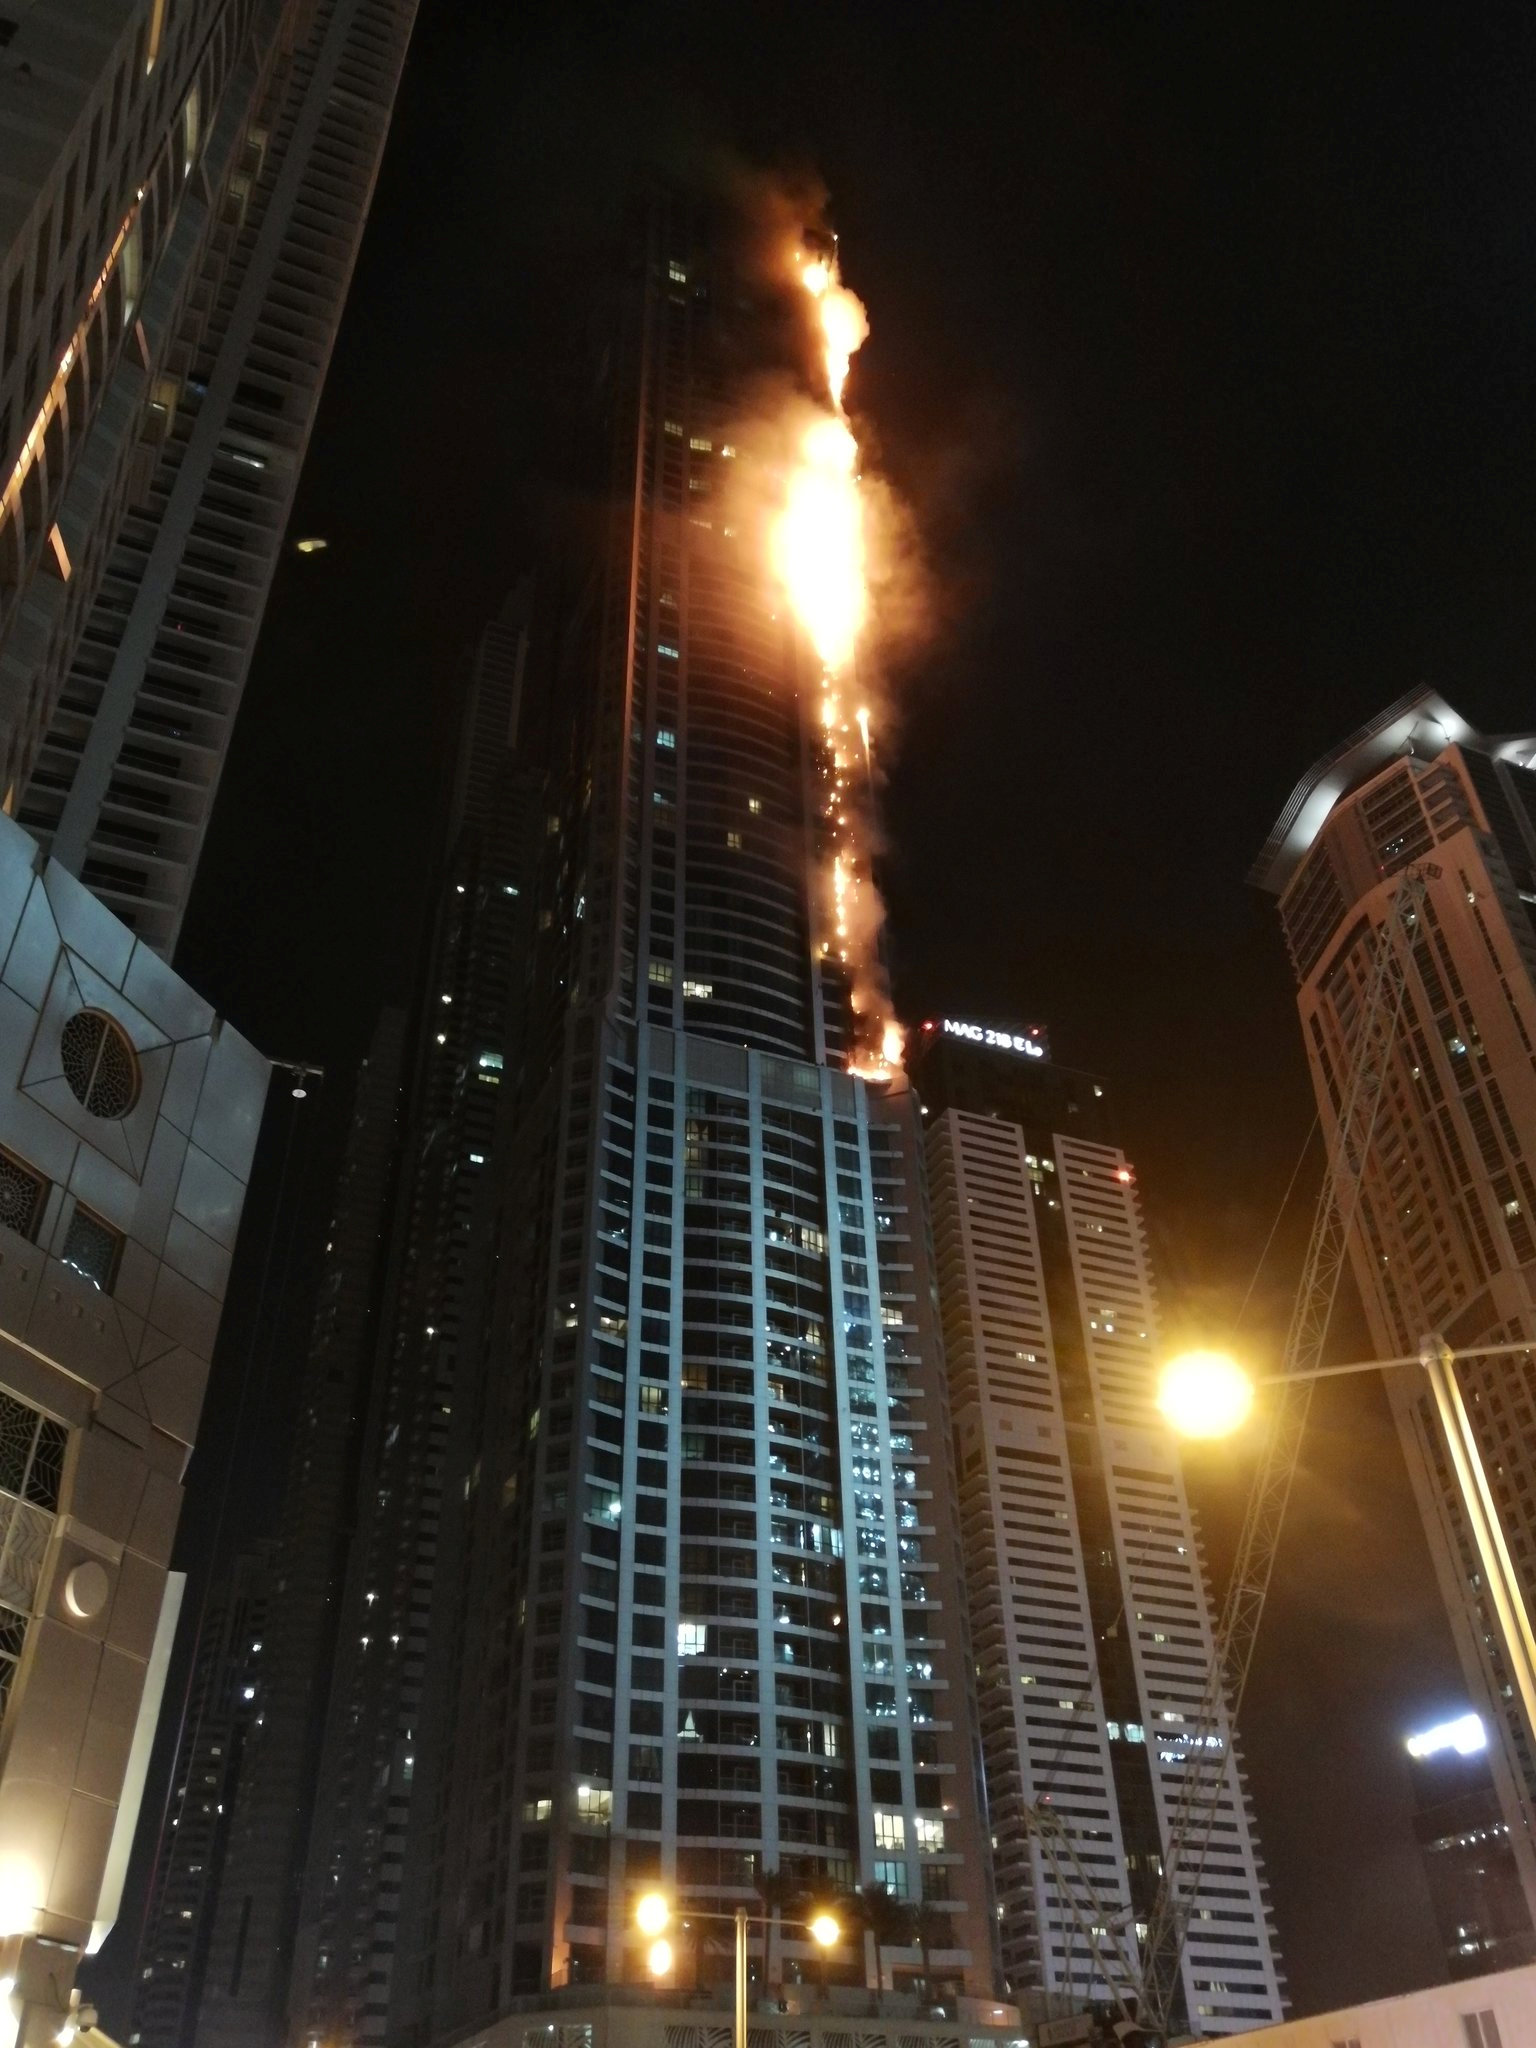 Flames shoot up the sides of the Torch tower residential building in the Marina district, Dubai, United Arab Emirates in this picture by Mitch Williams - 3TP NARCH/NARCH30 MNDTY